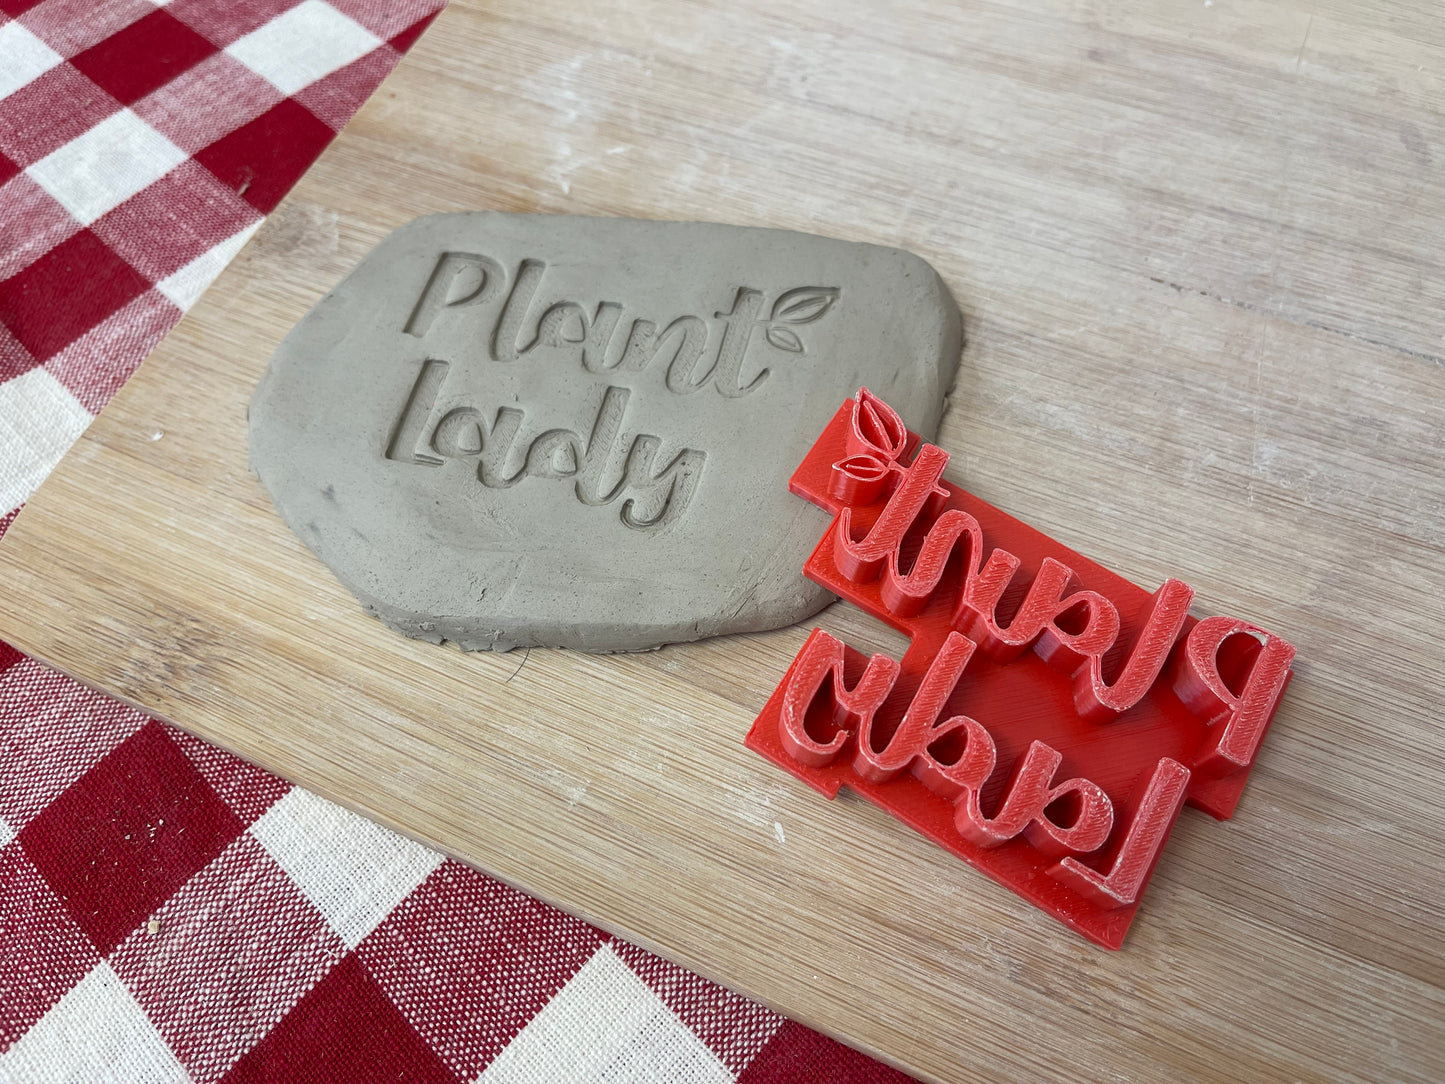 "Plant Lady" with leaves word Pottery stamp - plastic 3D printed, multiple sizes